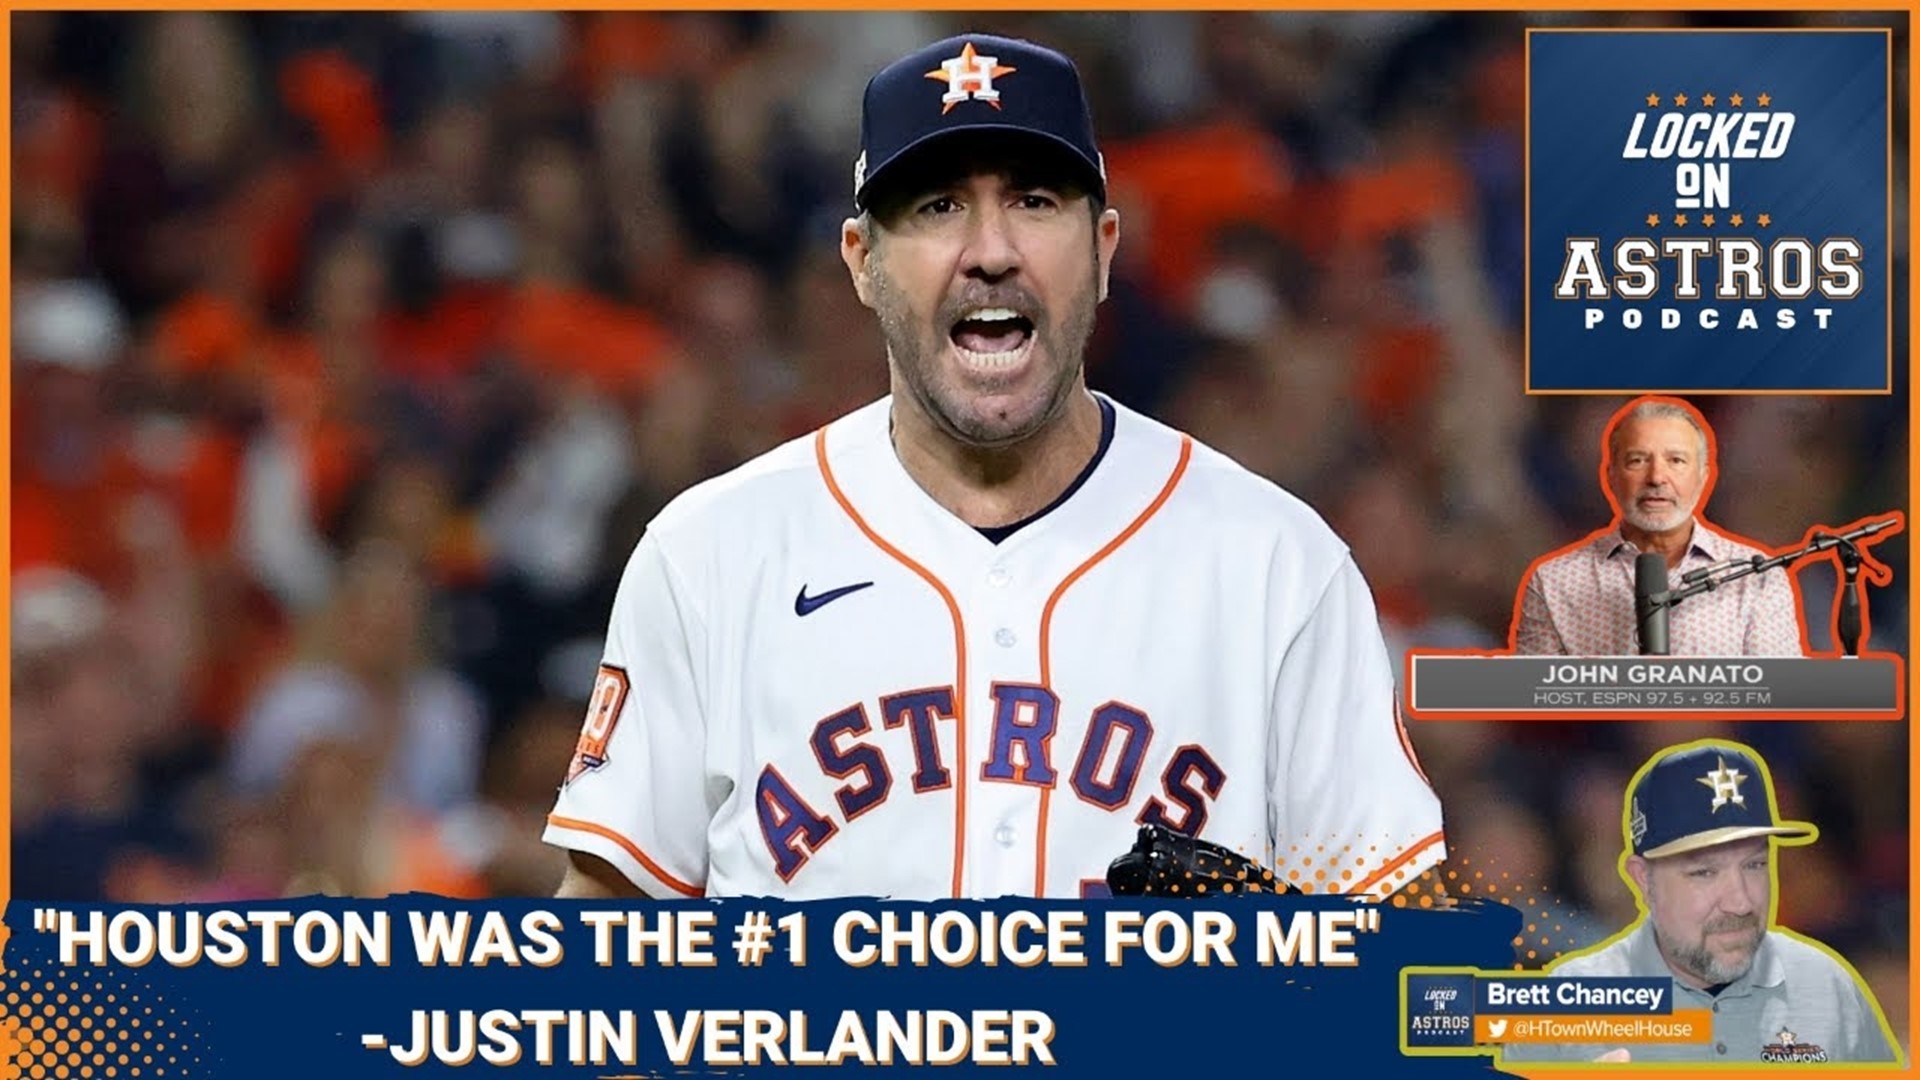 Astros: Justin Verlander is Here, Looking into the Future with John Granato